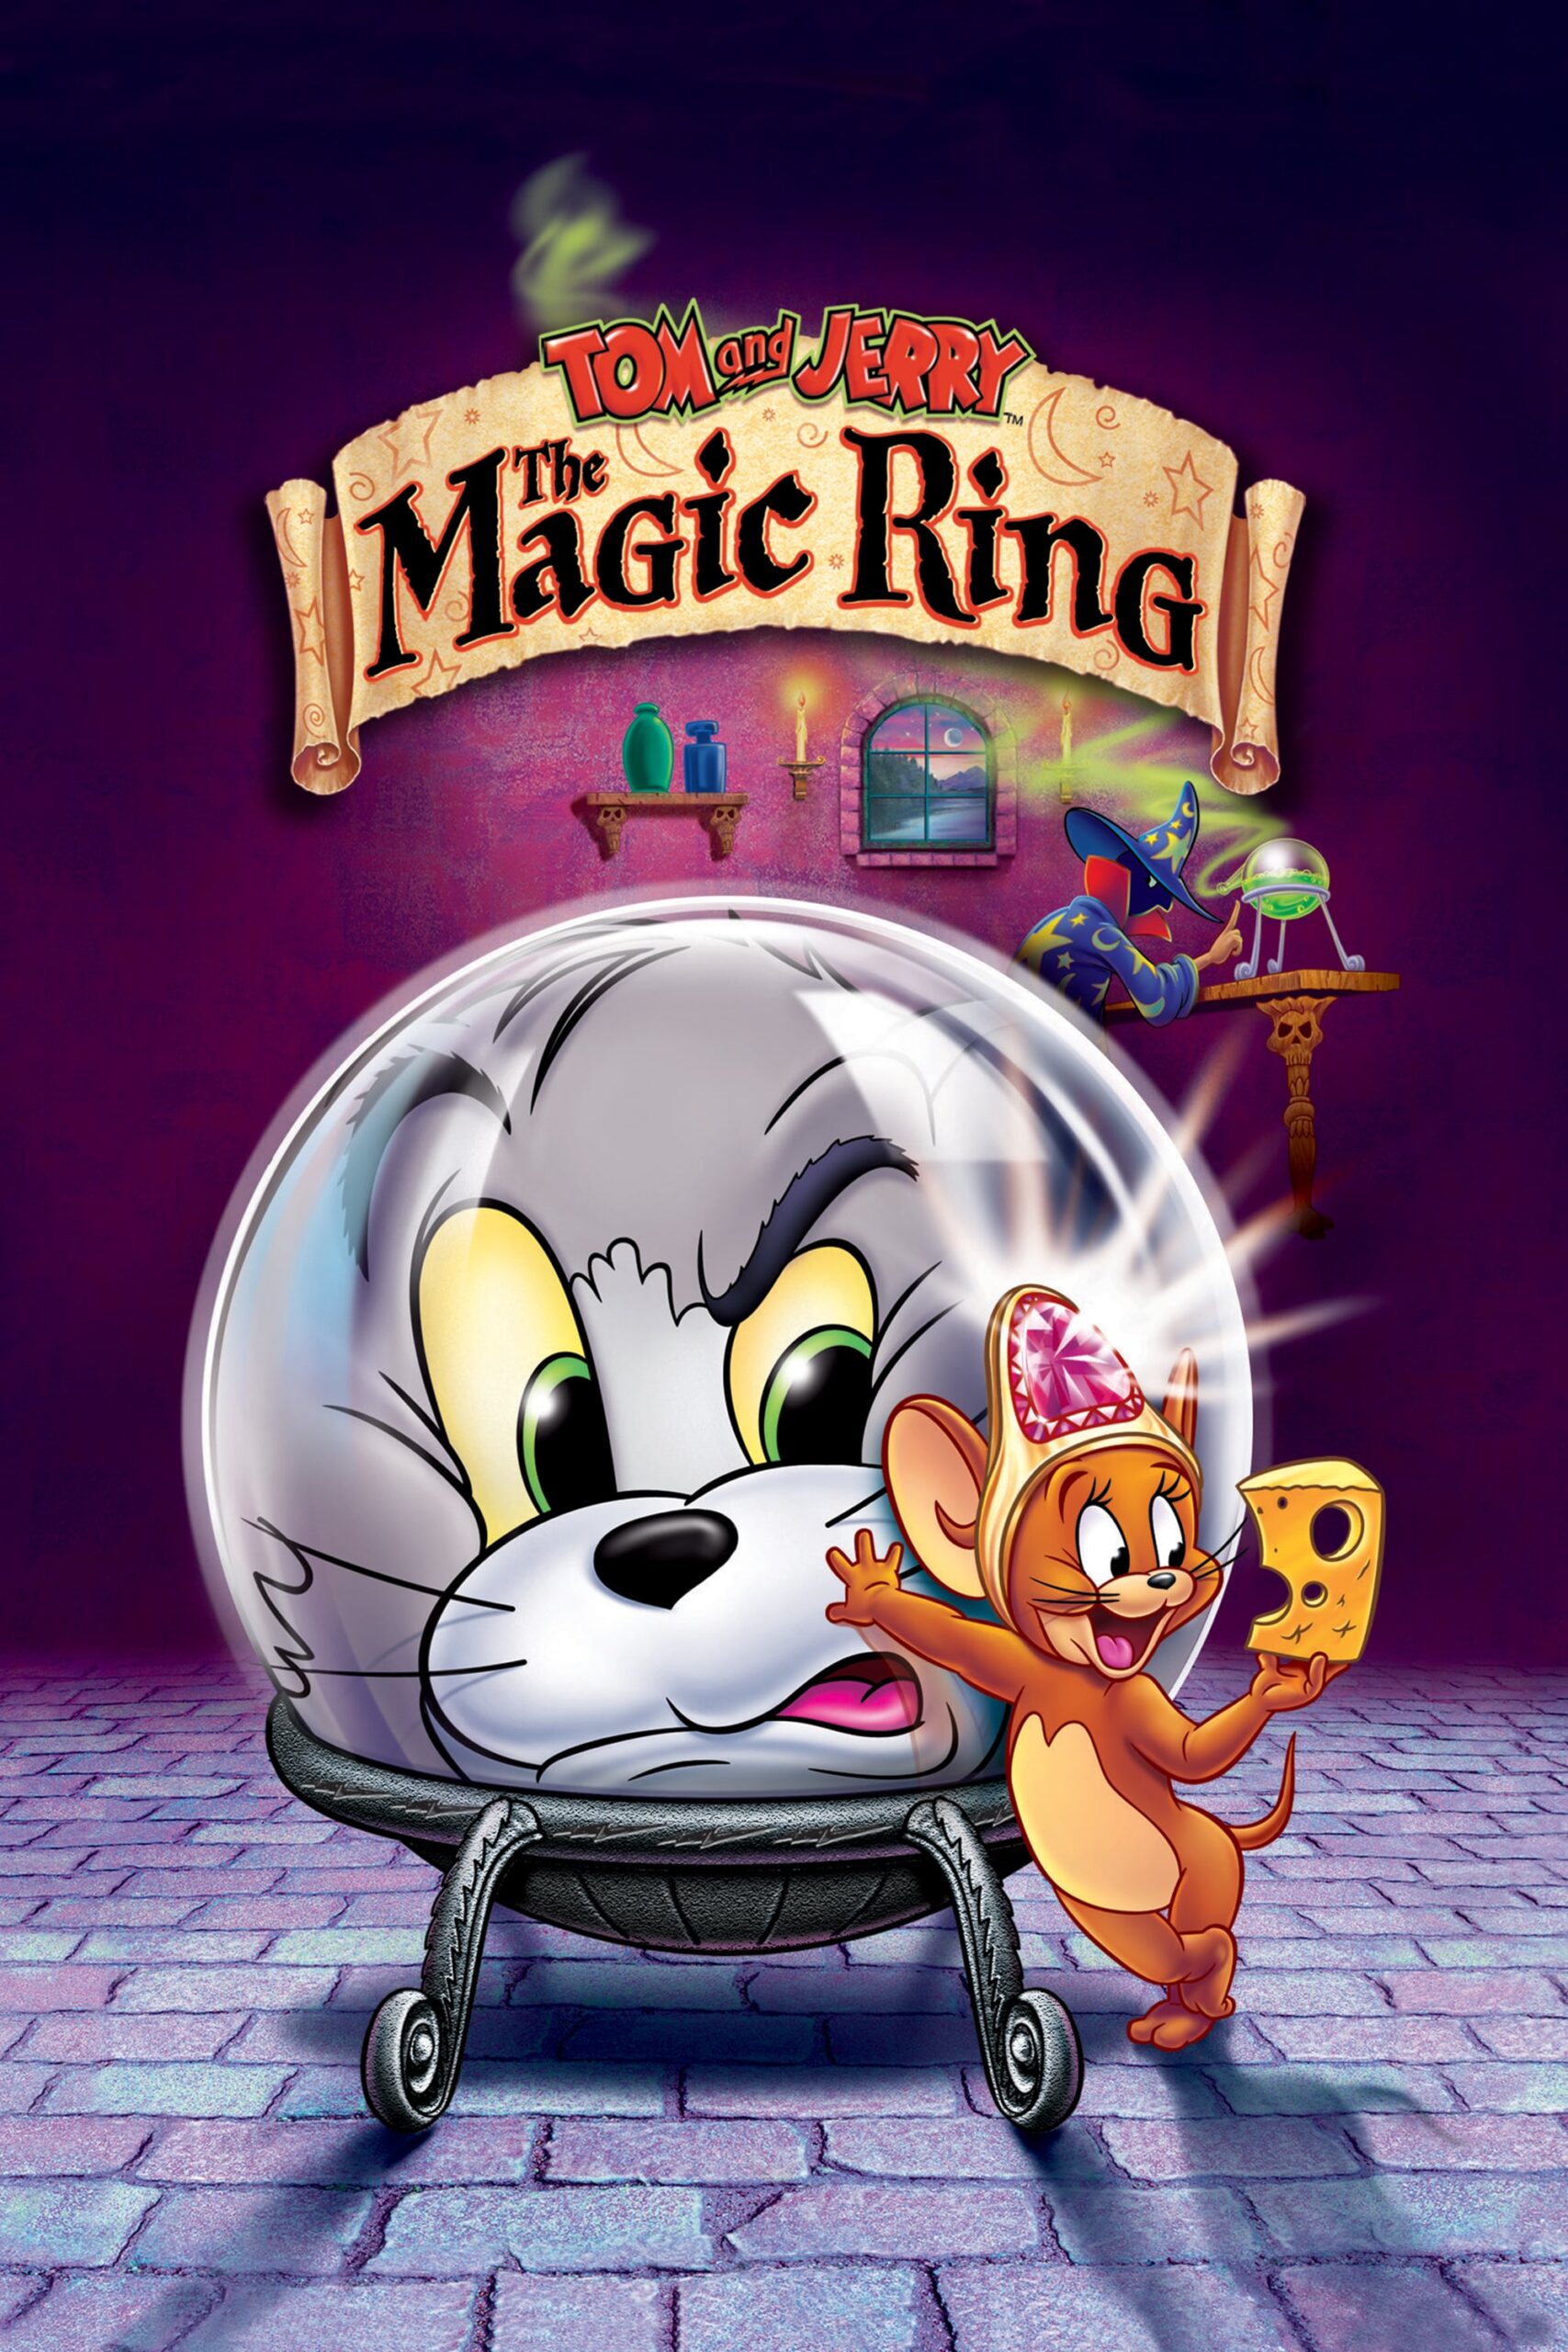 Poster for the movie "Tom and Jerry: The Magic Ring"